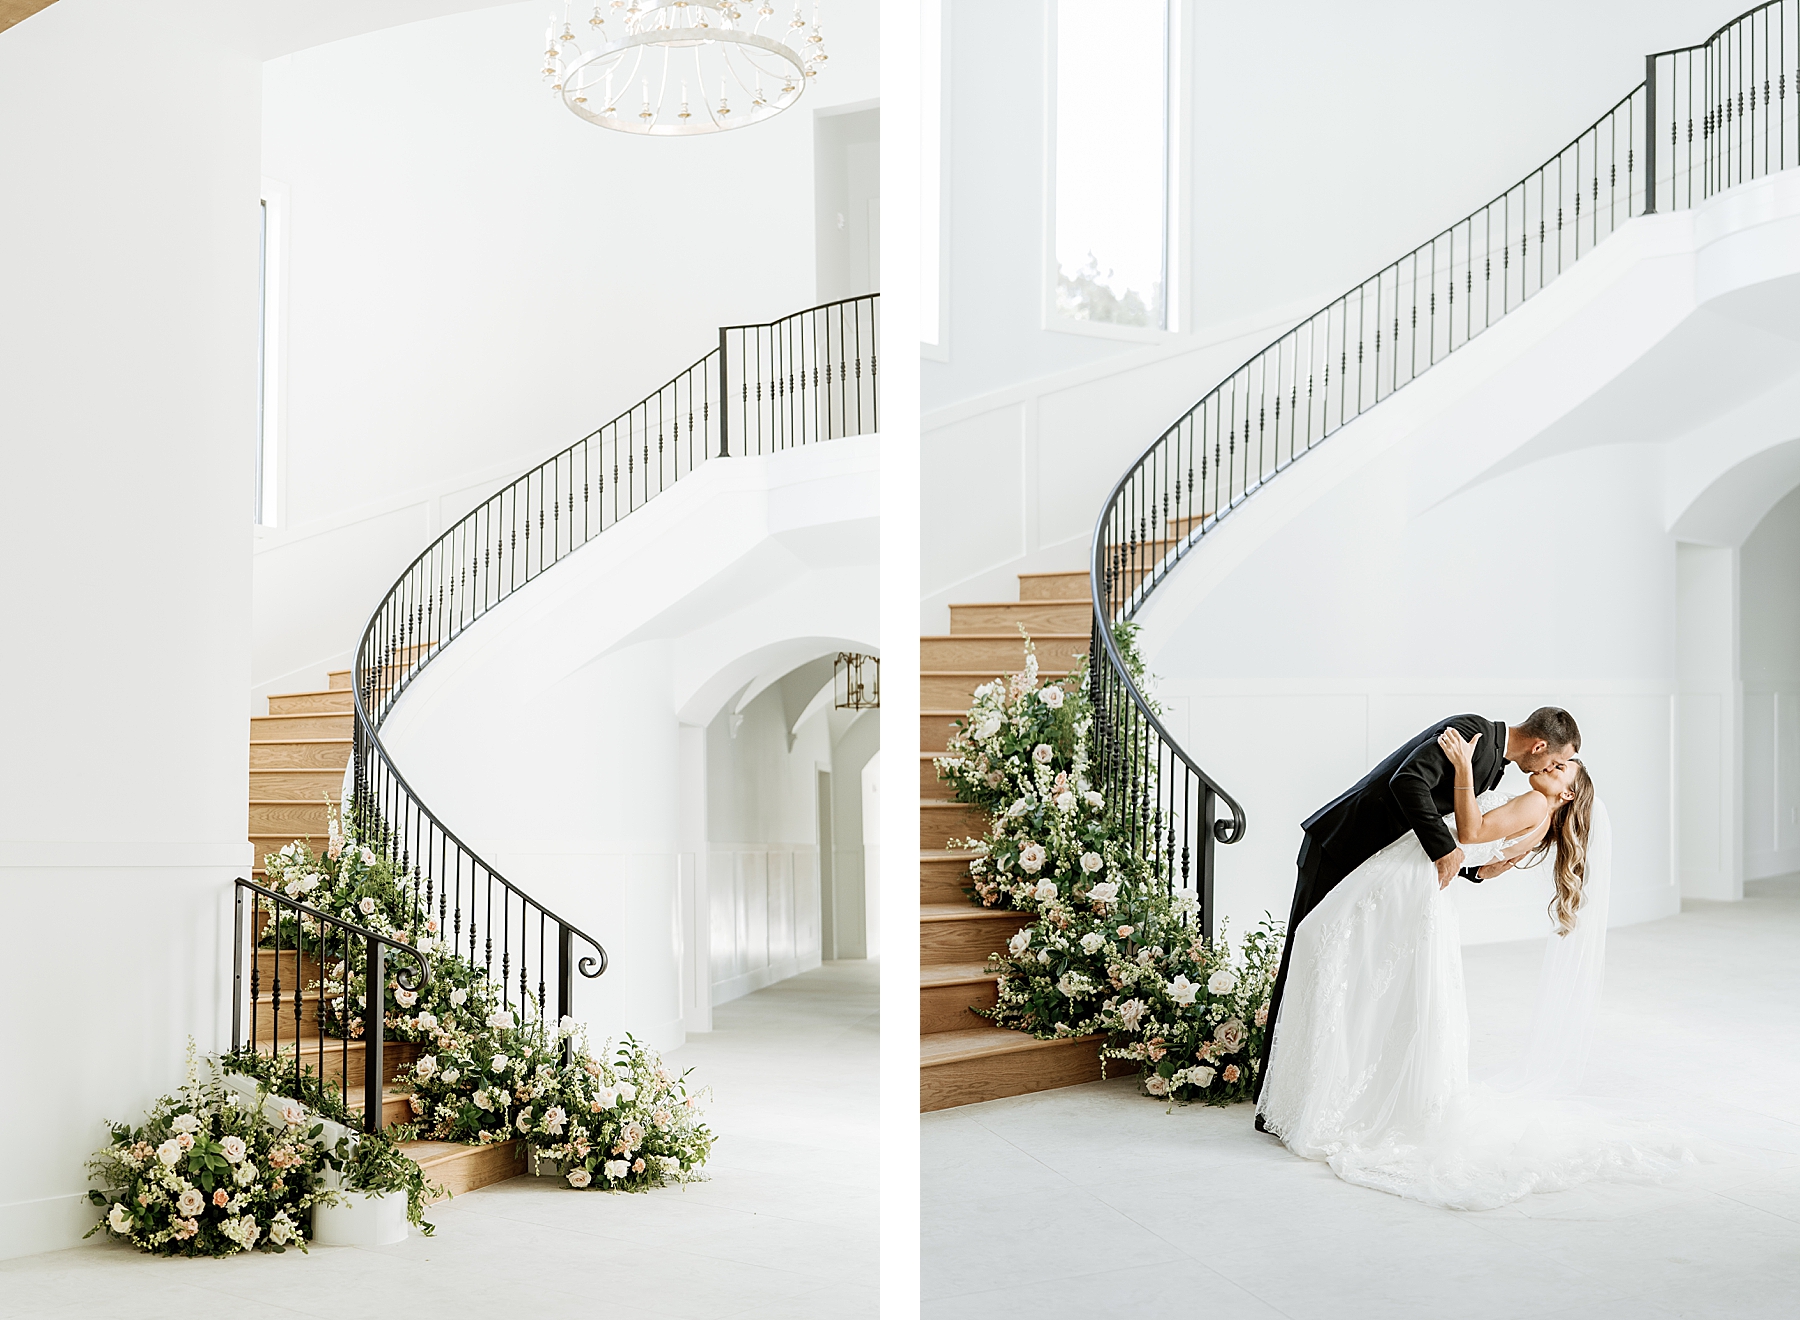 Grand staircase with floral installs on wedding day | Reiley and Rose | Central Texas Wedding Floral Designer | The Preserve at Canyon Lake Wedding Venue | classic wedding inspiration, chic wedding, pink wedding color scheme | via reileyandrose.com